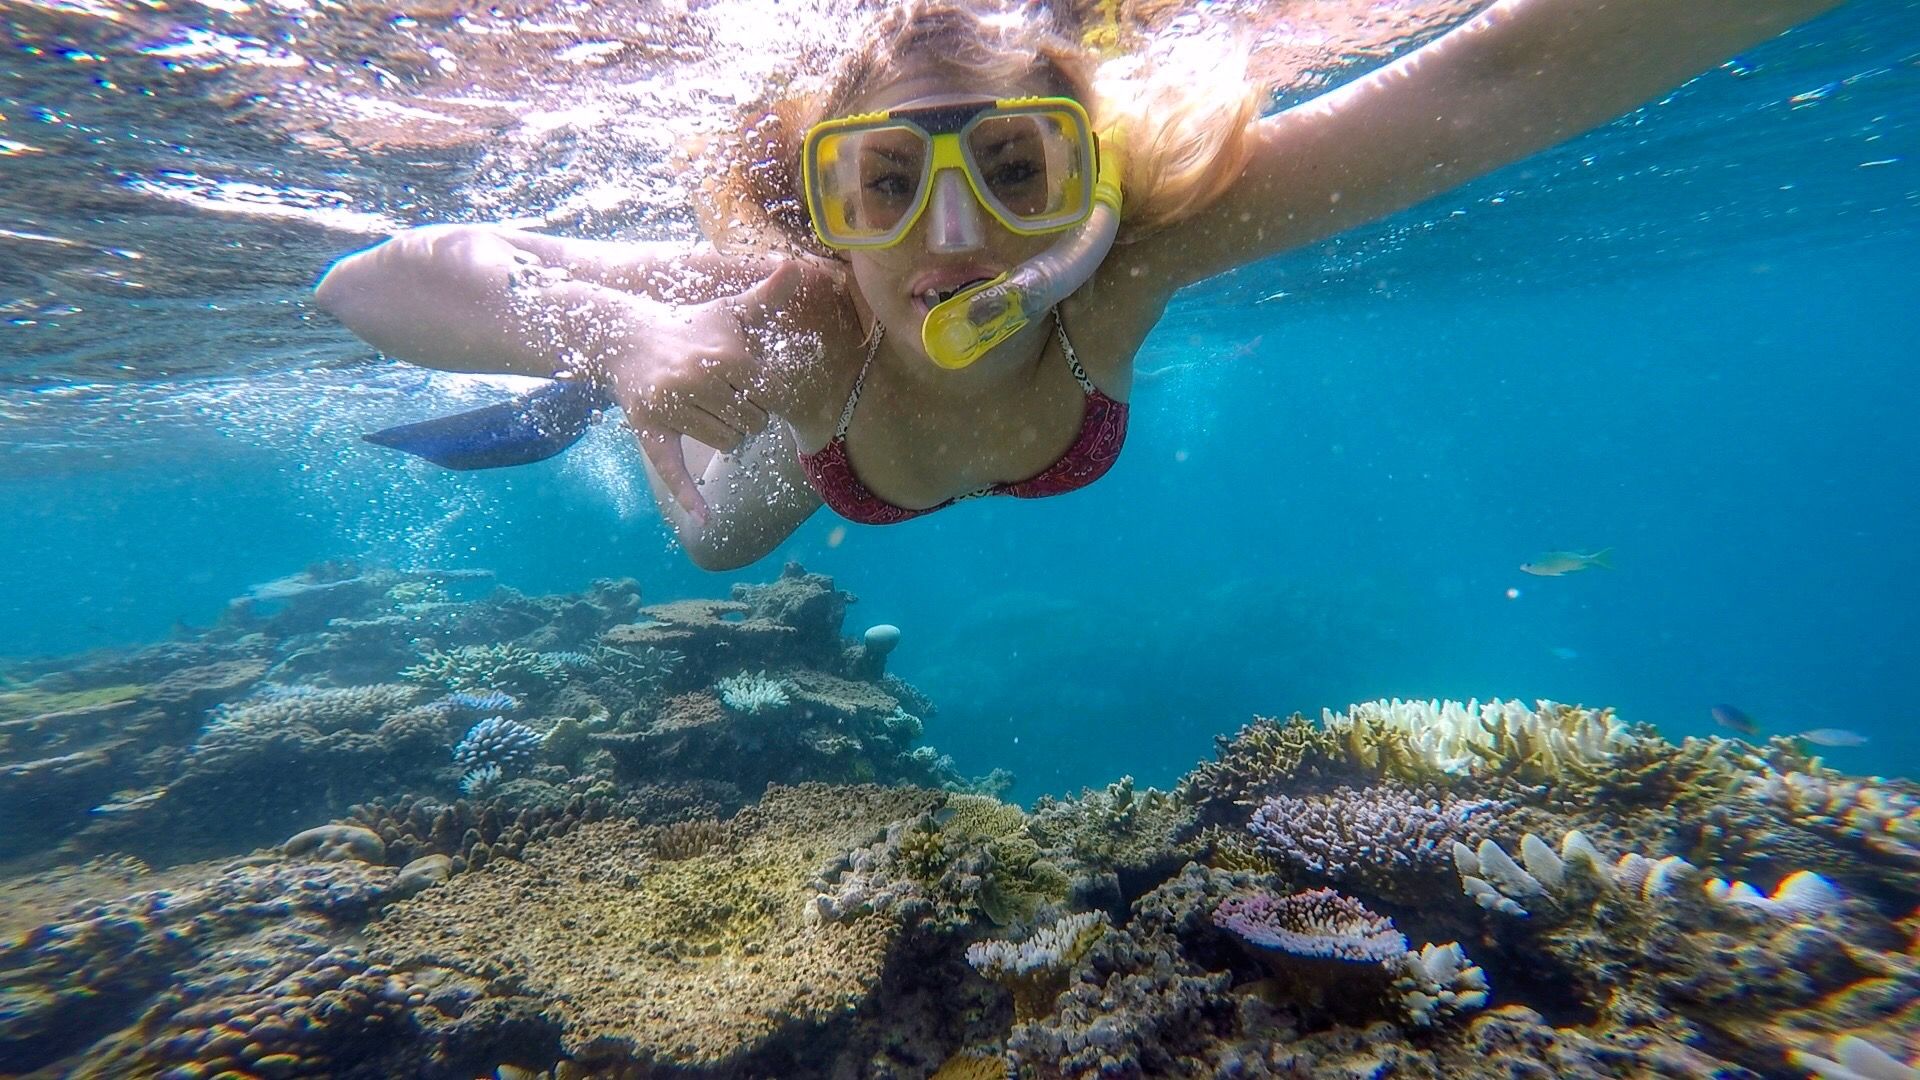 Snorkeling at The Great Barrier Reef